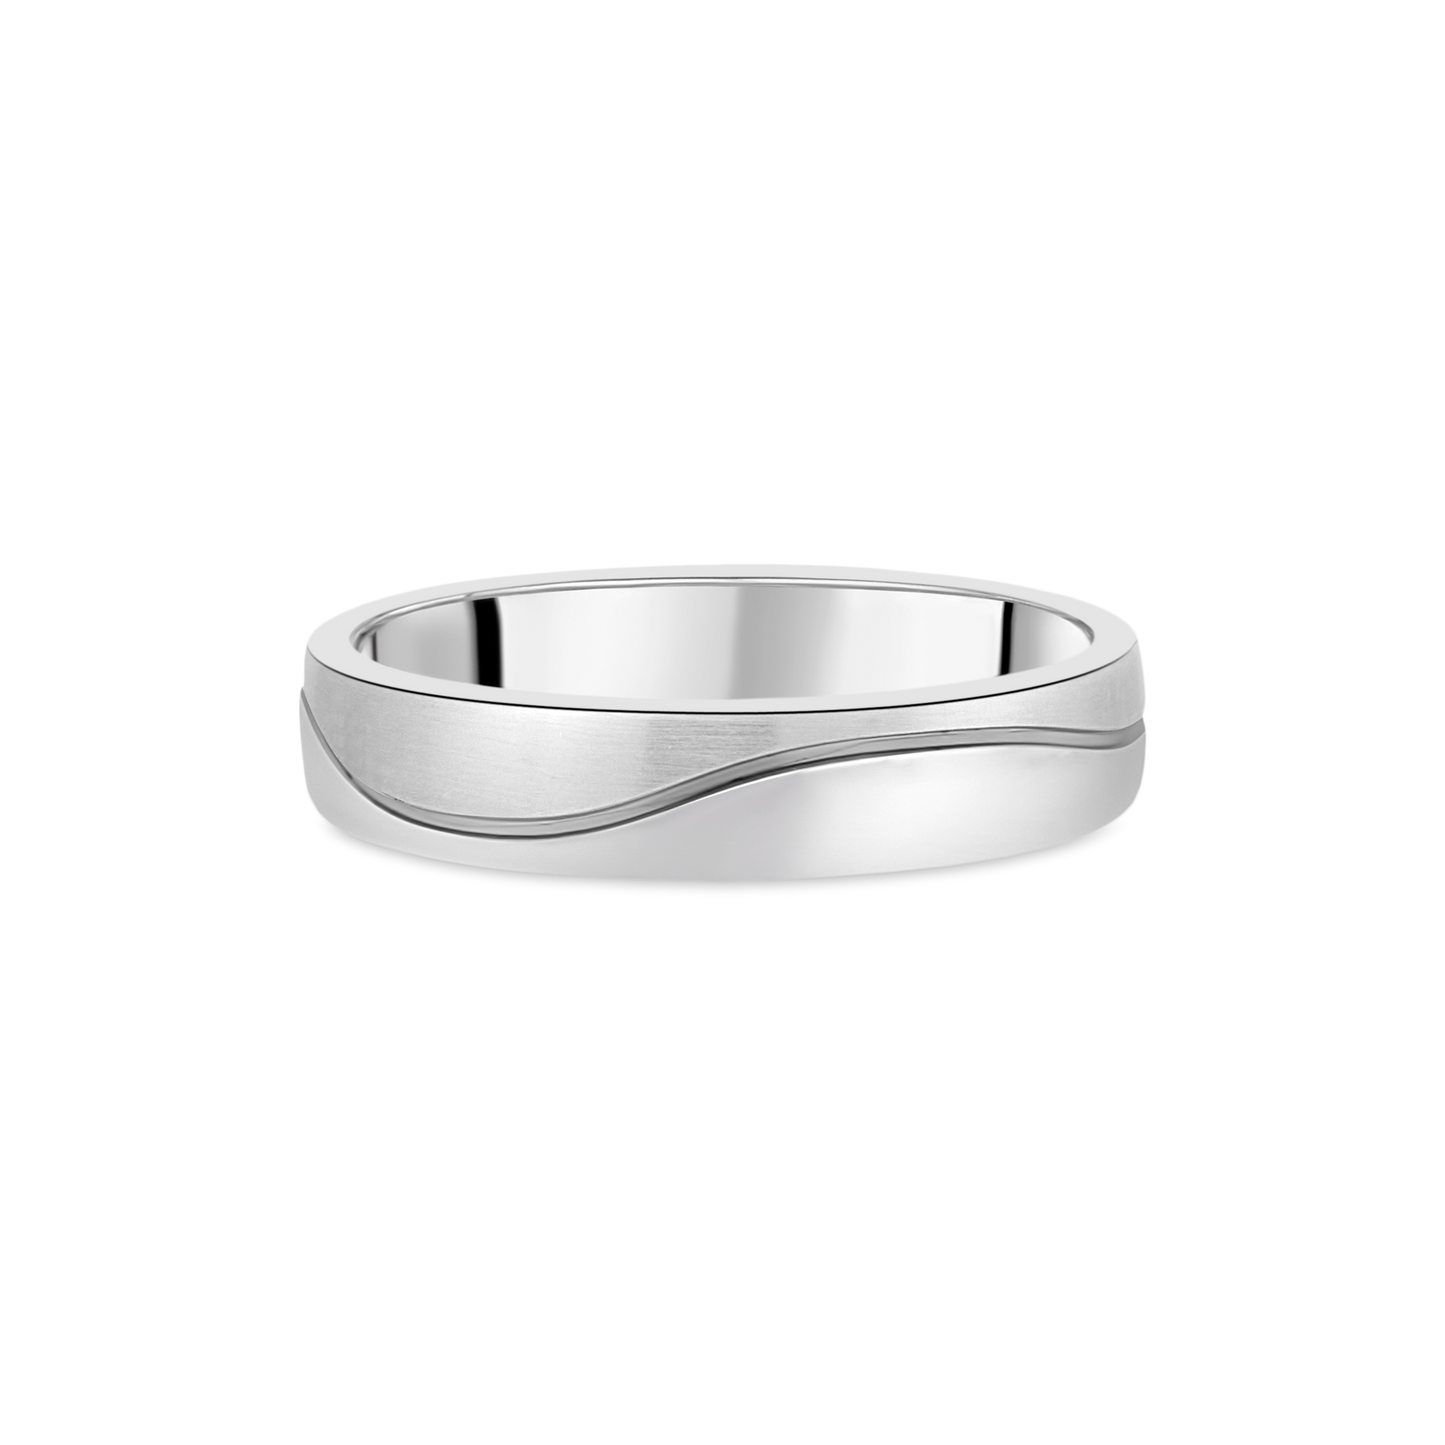 Brushed Platinum 5mm Gents Wedding Band with Wave Engraving